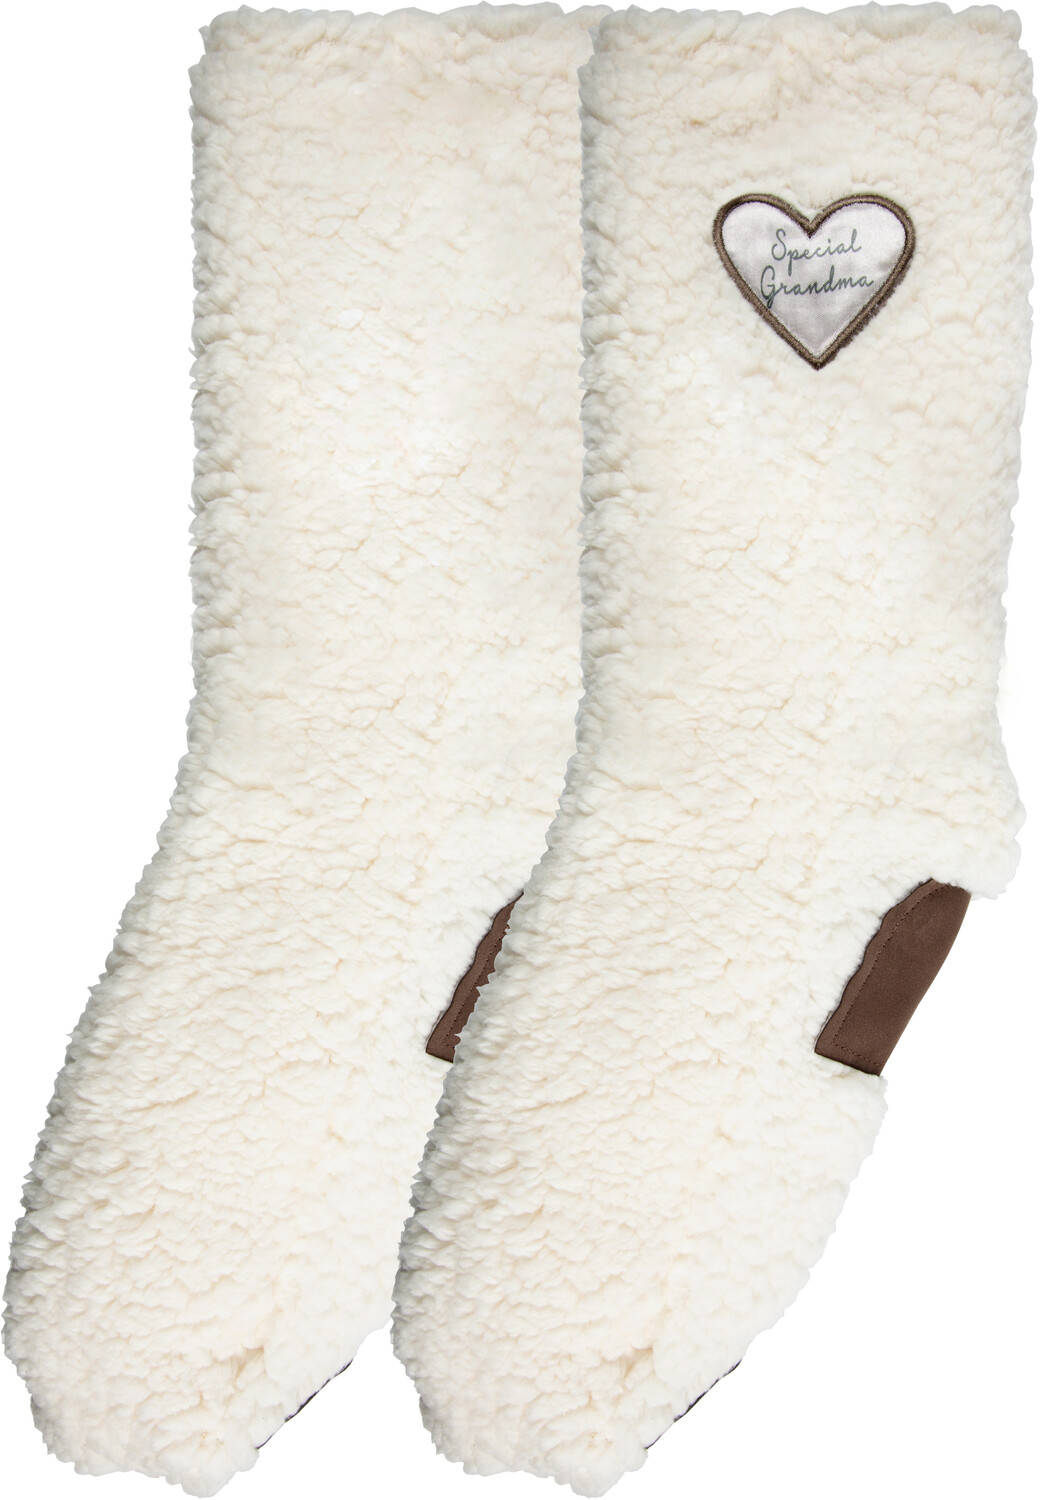 Special Grandma by Comfort Collection - Special Grandma - One Size Fits Most Sherpa Slipper